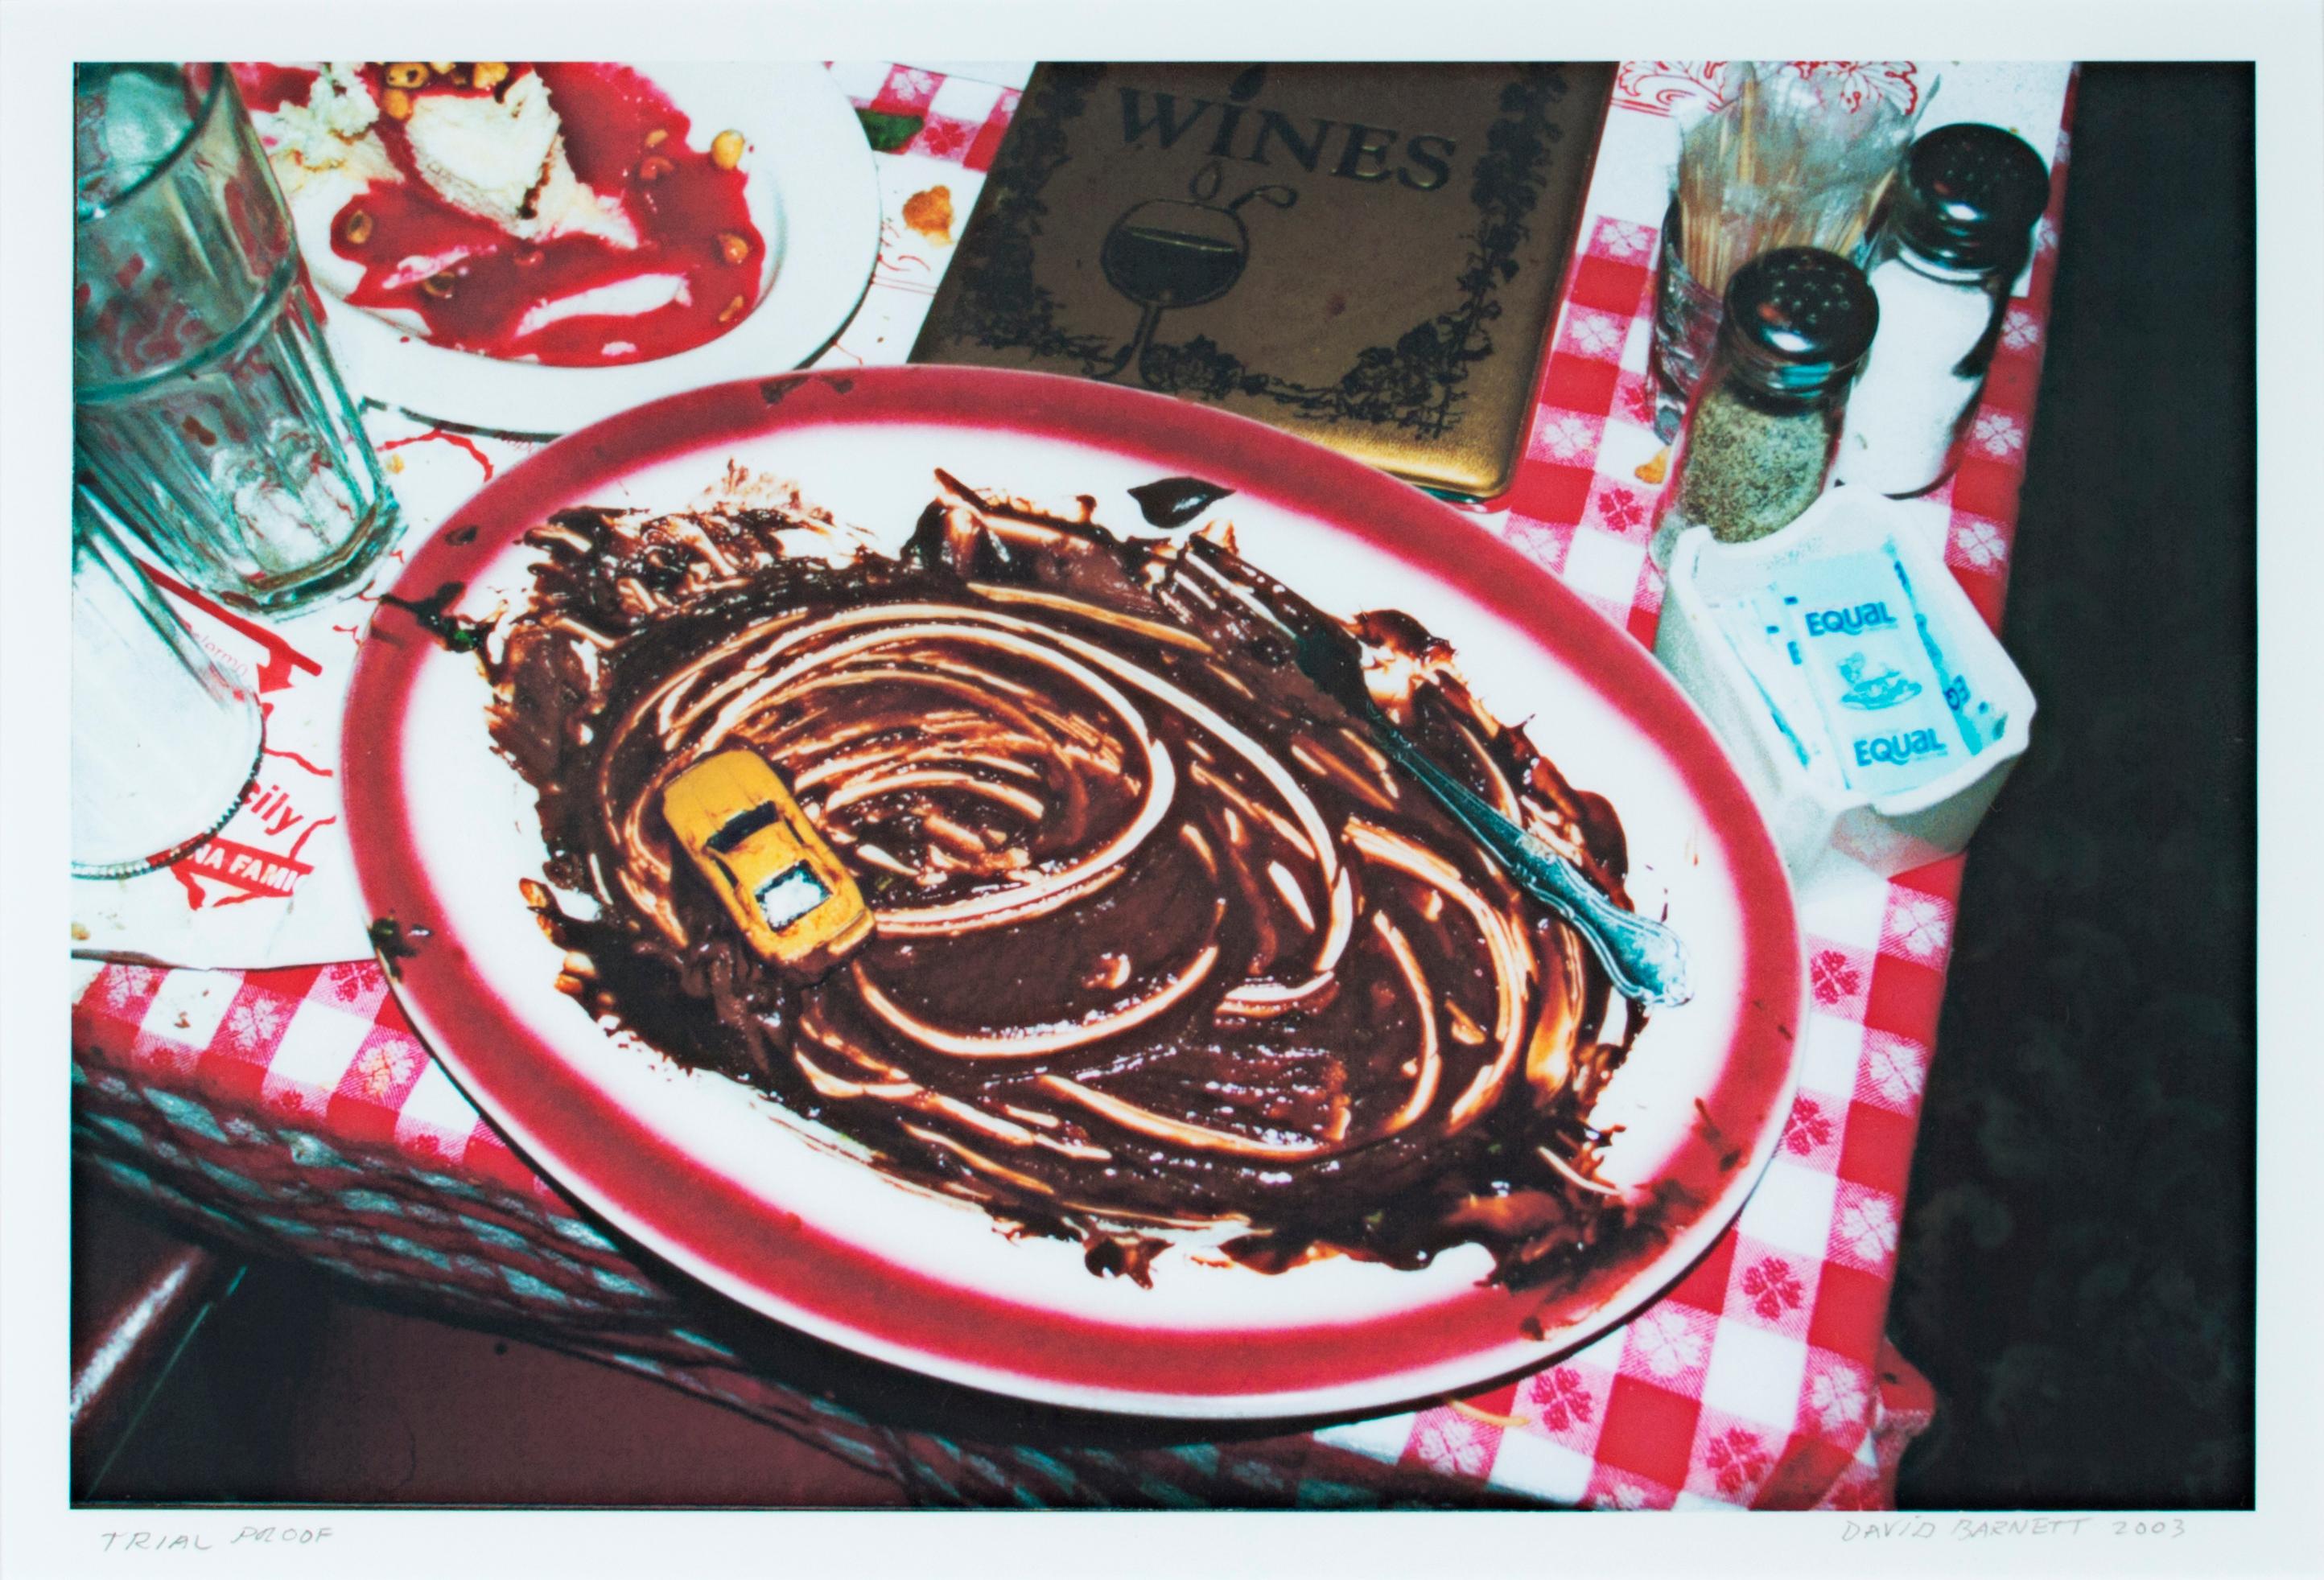 'Buca di Beppo - Chocolate Demolition Derby' signed trial proof photograph - Photograph by David Barnett